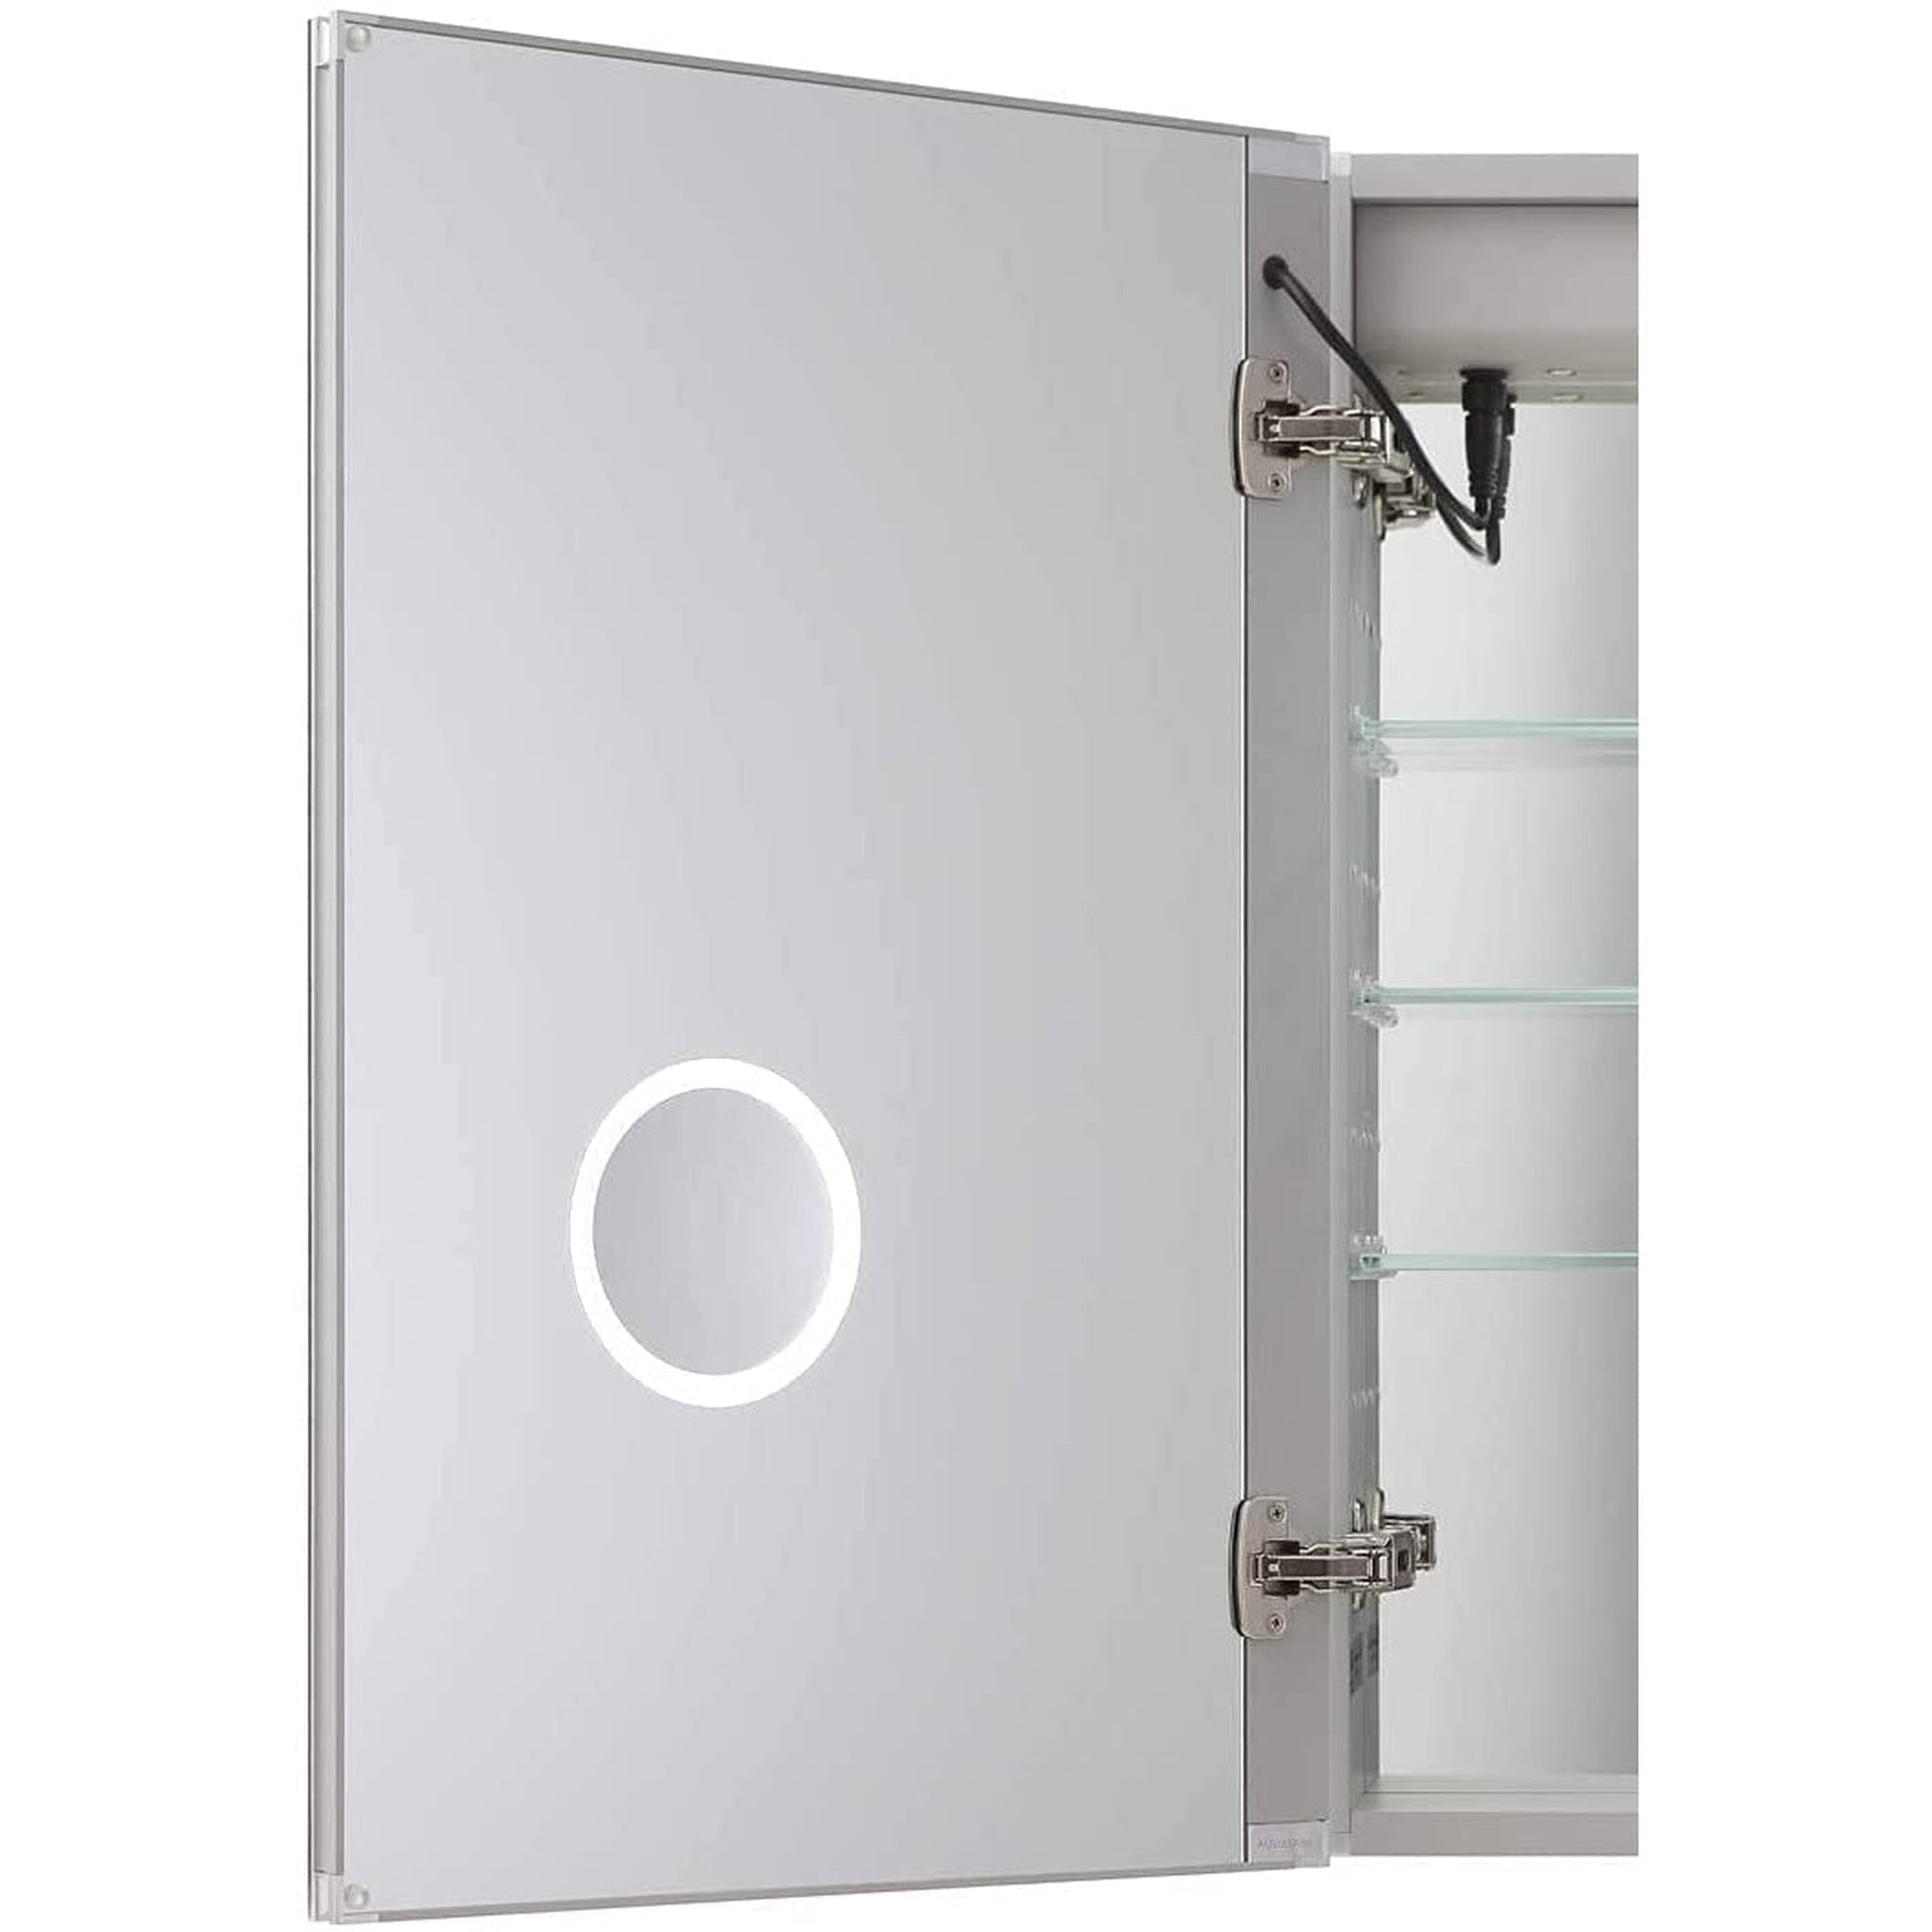 Aquadom Royale Plus 24" x 30" Extra Depth Rectangular Recessed or Surface Mount Single View Right Hinged LED Lighted Bathroom Medicine Cabinet With Defogger, Electrical Outlet, Magnifying Mirror